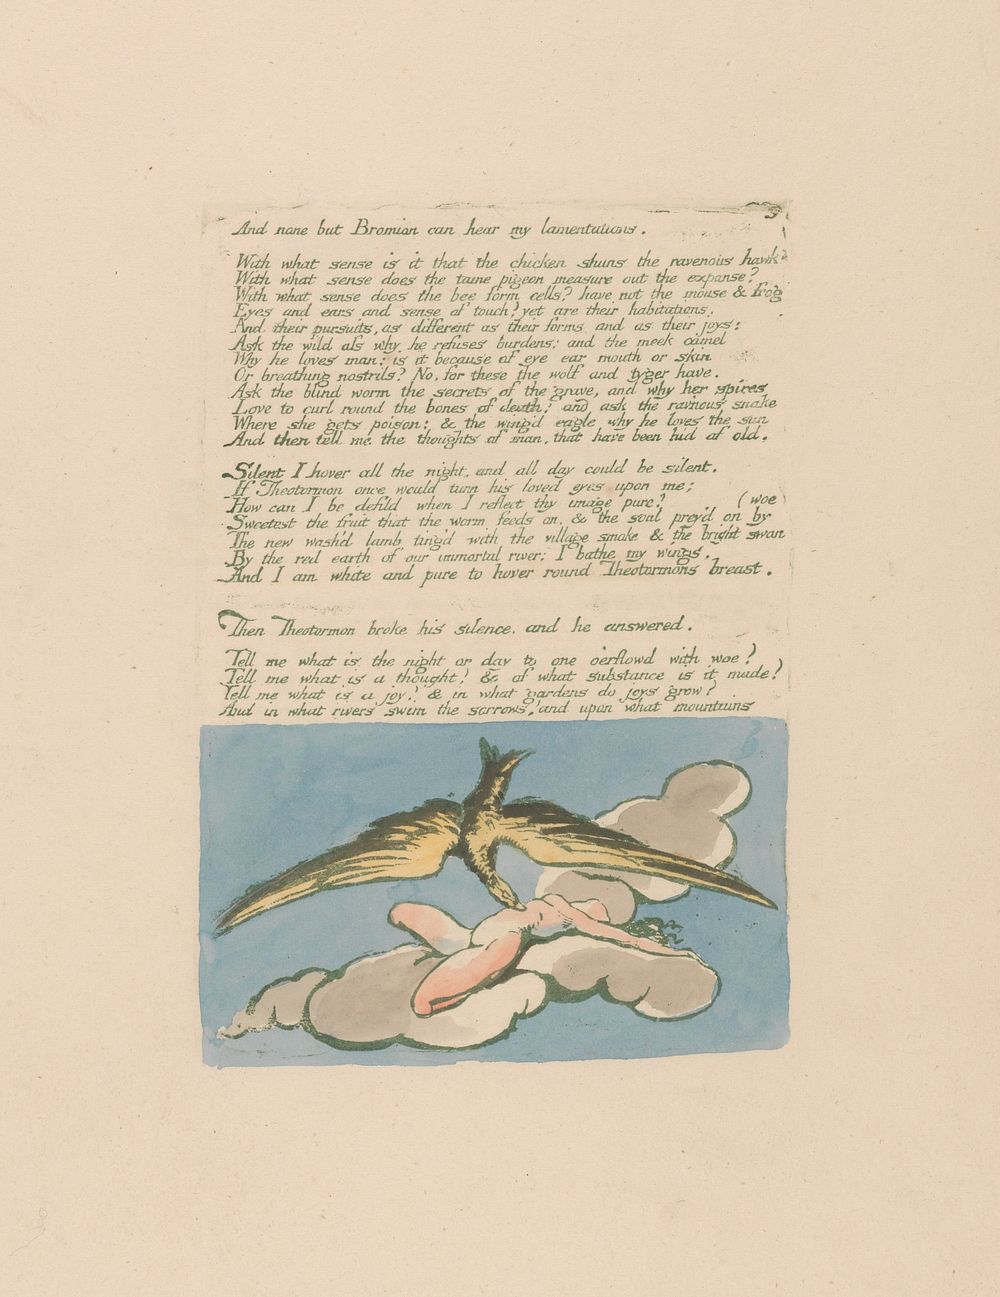 Visions of the Daughters of Albion, Plate 6, "And none but Bromian . . . . " by William Blake by William Blake